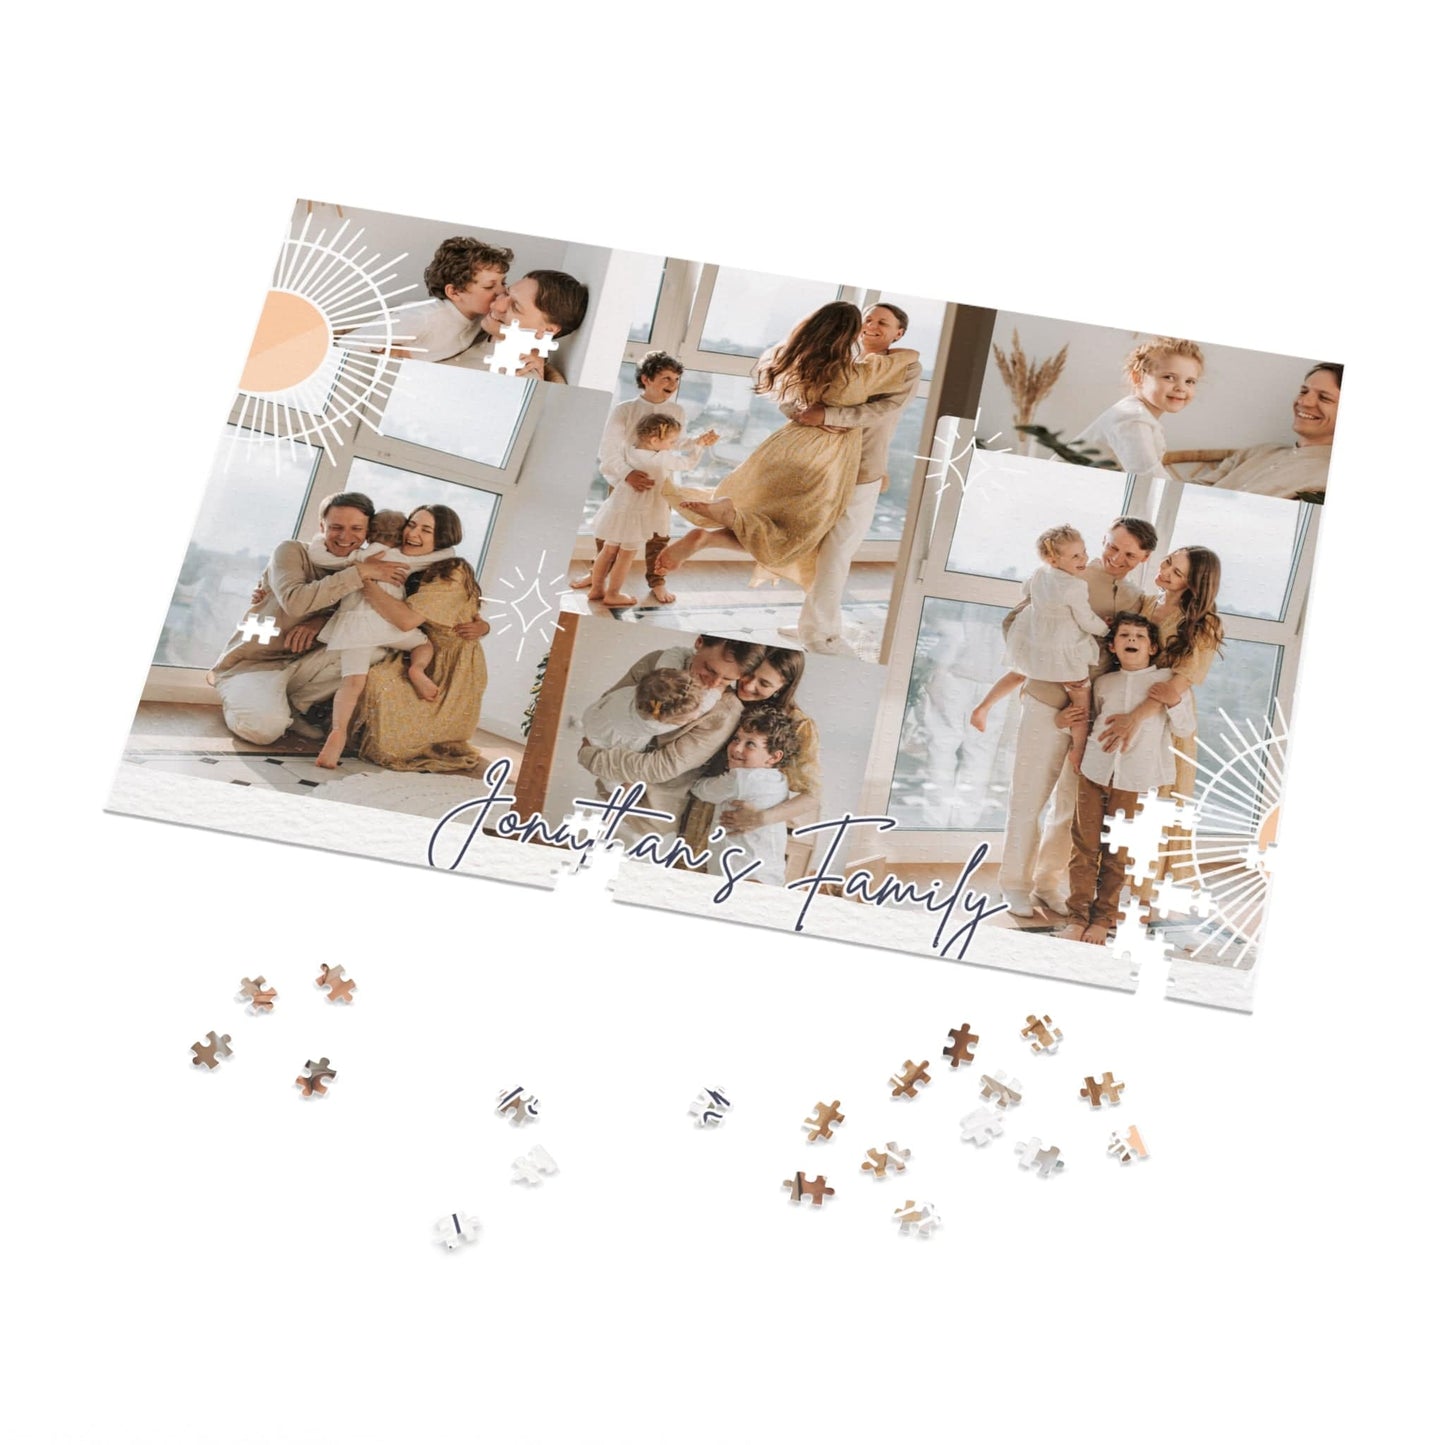 Custom Jigsaw Puzzle with Personalized Photos & Text - 1000/500/252/110 Pieces - Ideal Valentine’s Day Gift for Couples